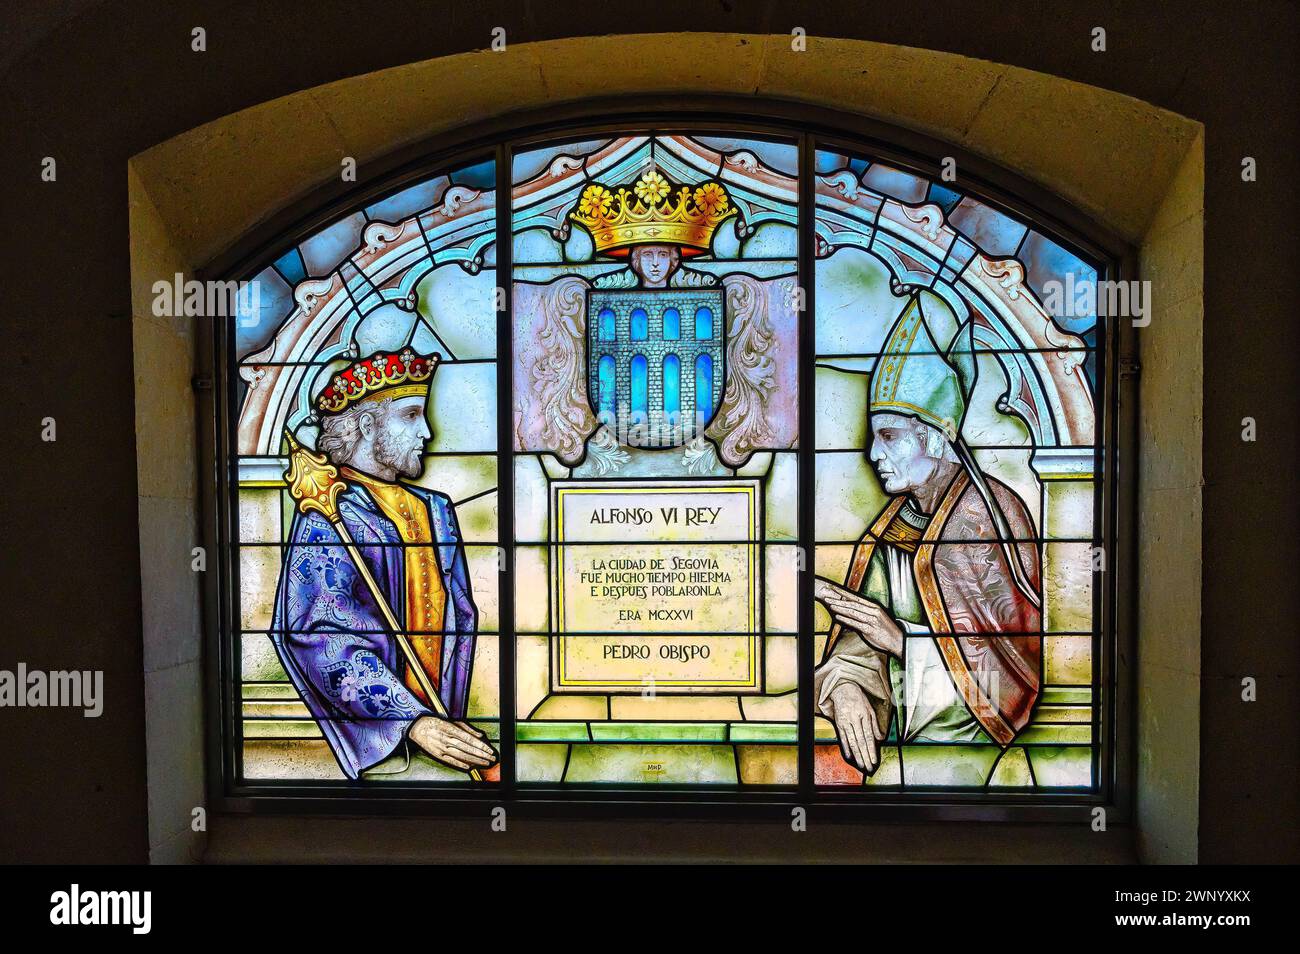 Stained glass window skylight with a king and a pope, alcazar of SEGOVIA, SPAIN Stock Photo